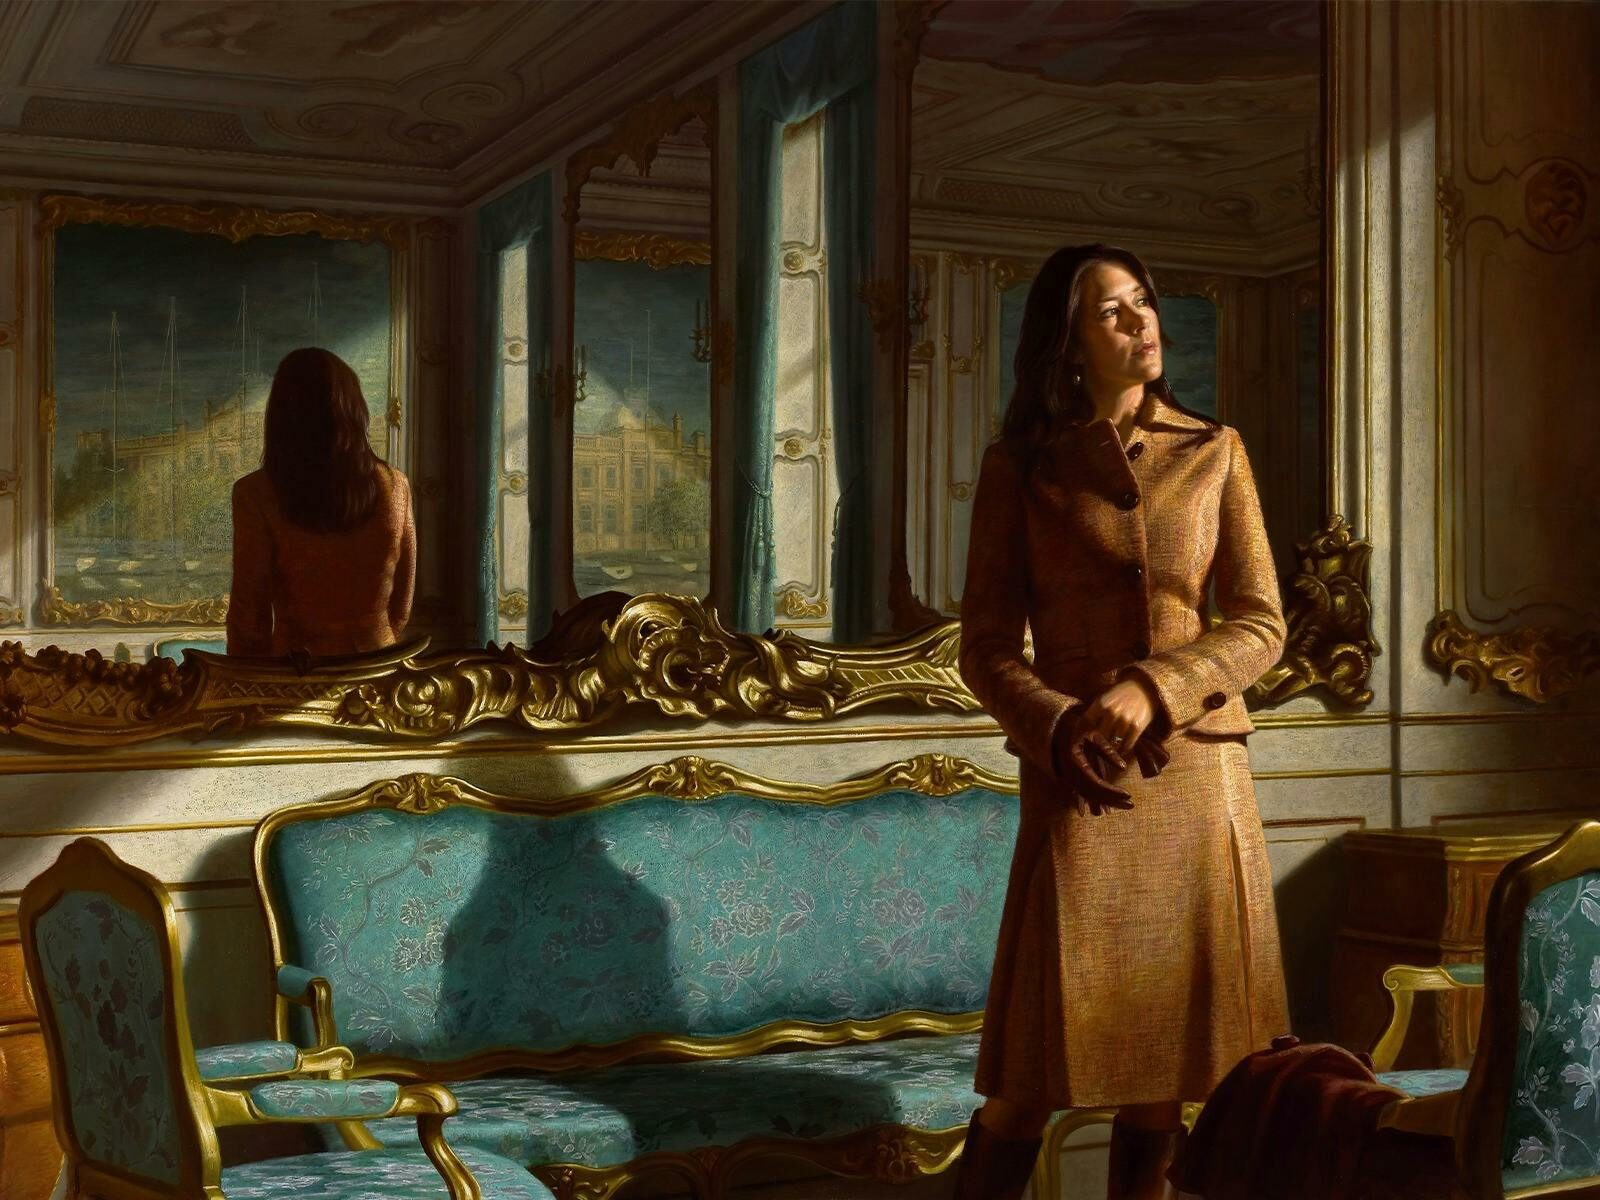 A painted portrait of Queen Mary of Denmark, wearing a brown skirt and shirt, looking out a window.